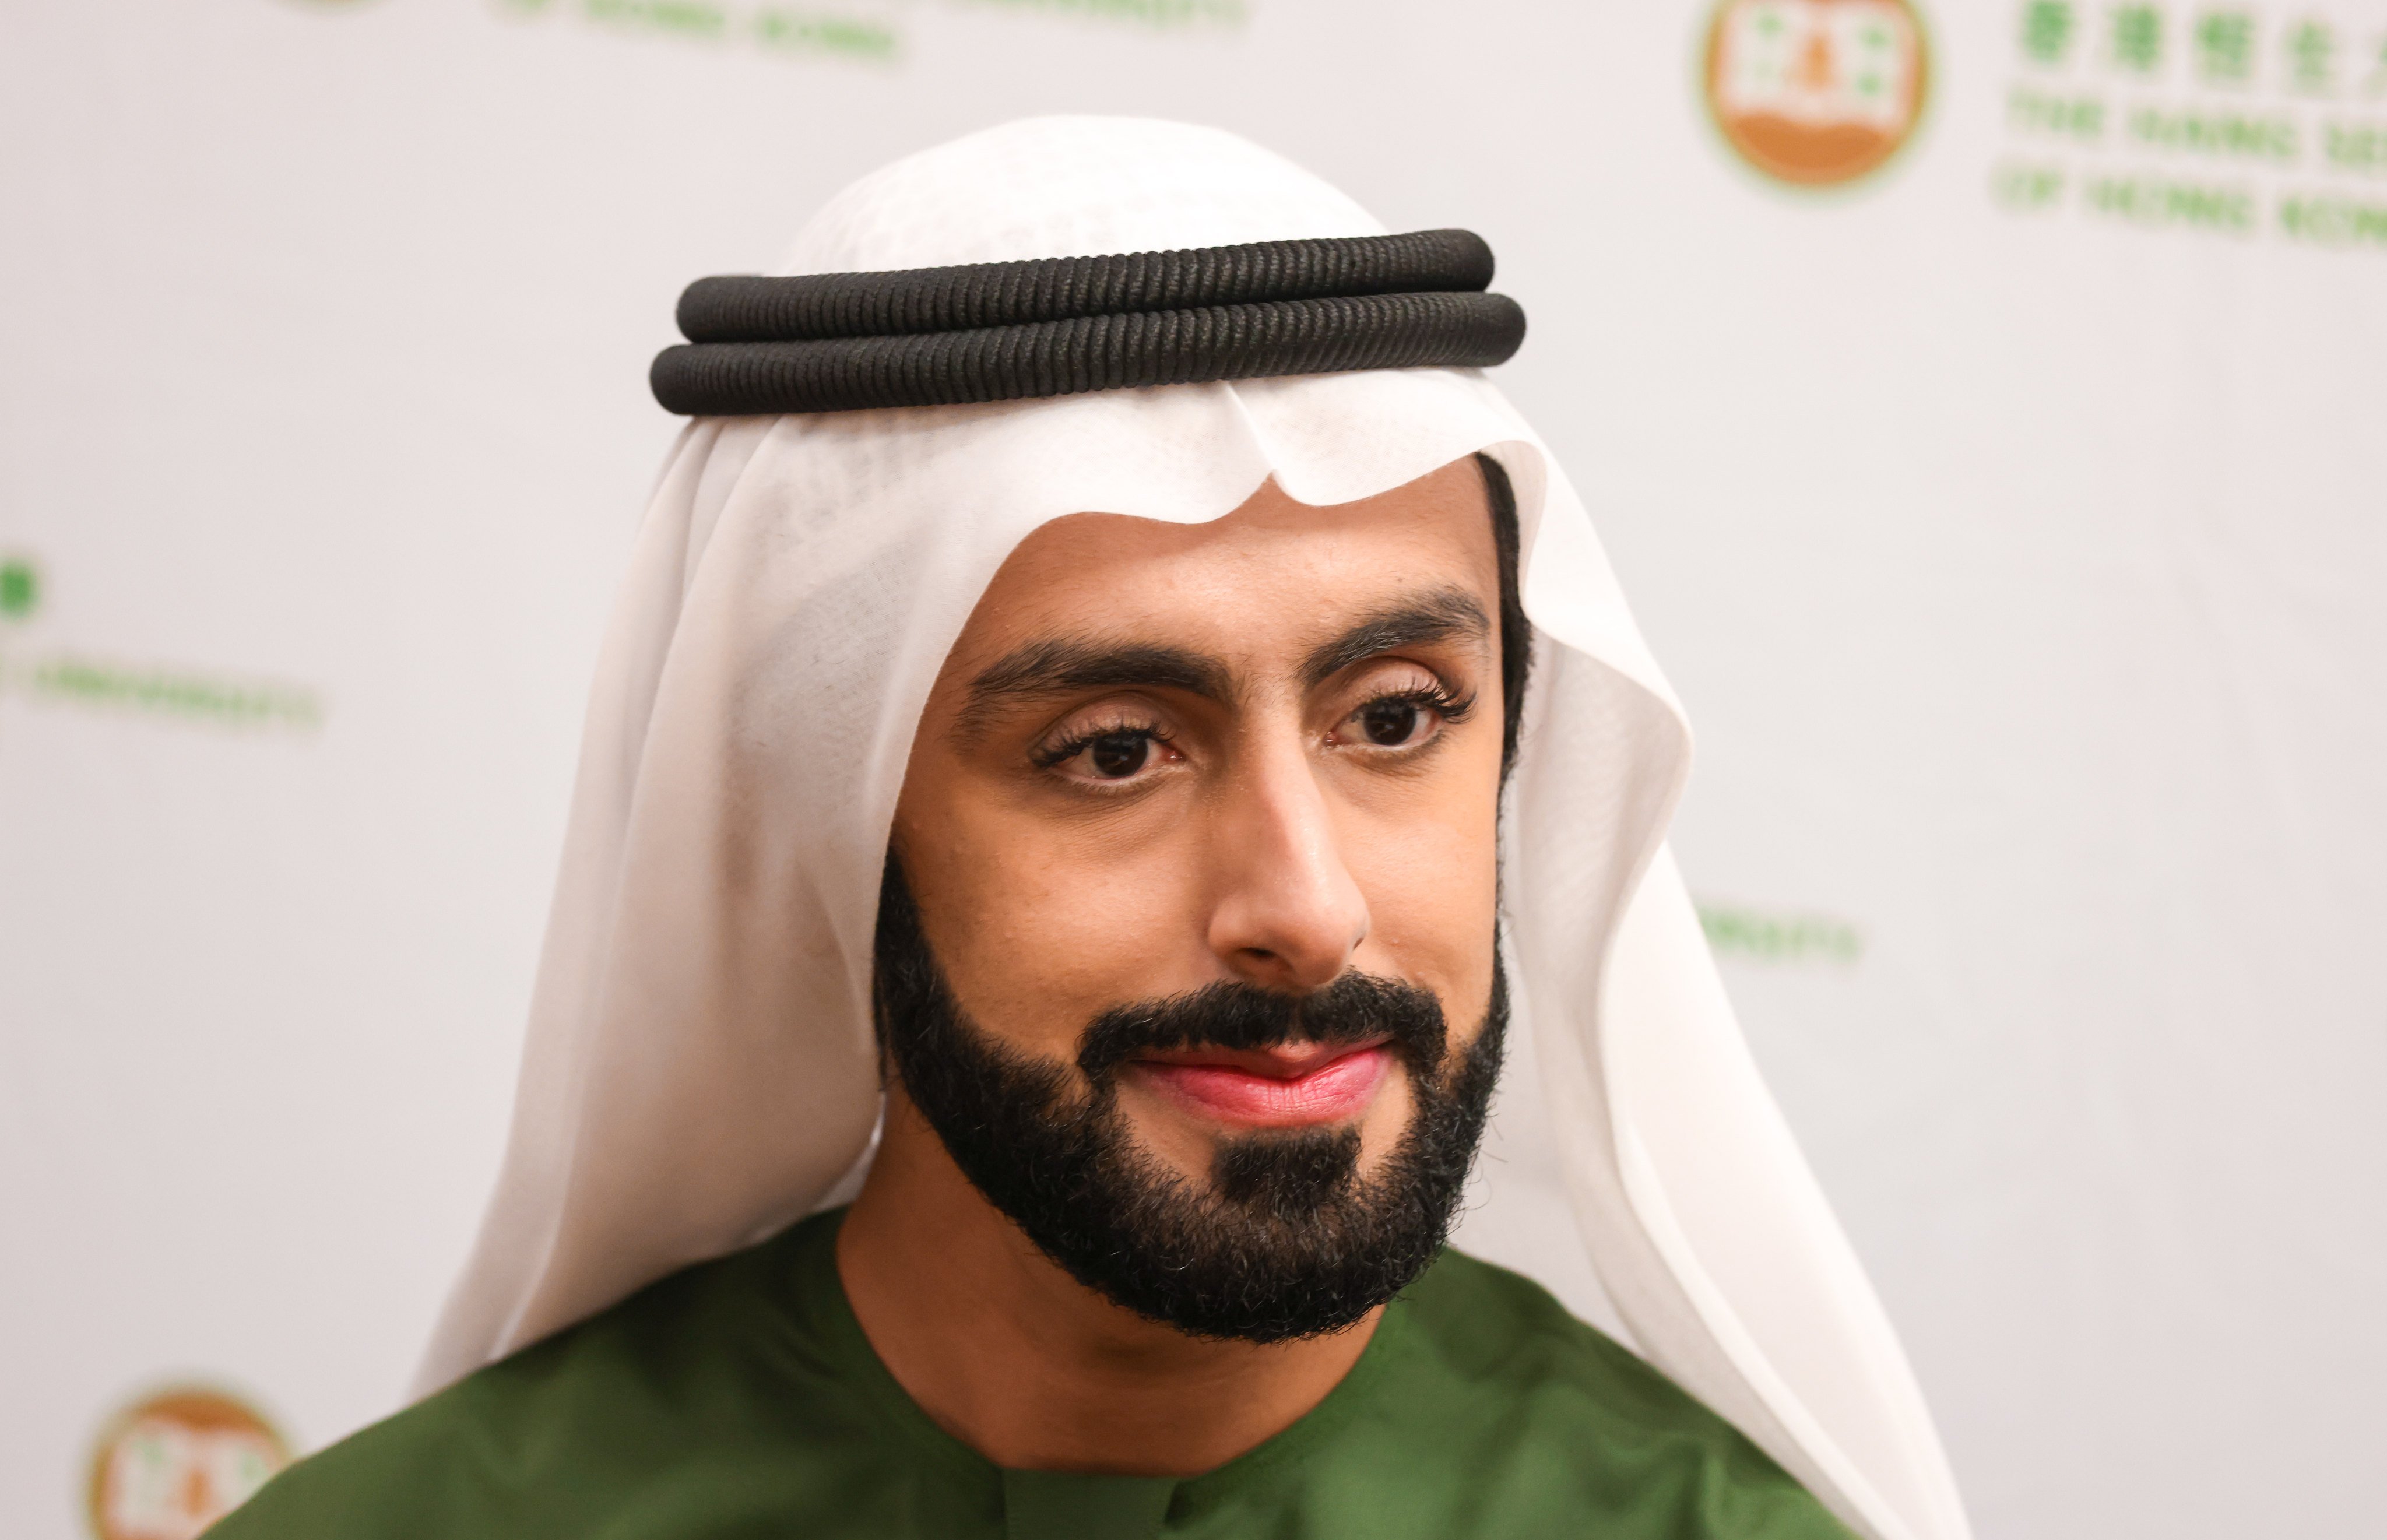 Sheikh Ali Al Maktoum’s ambitious US$500 million family office plan attracted considerable interest from the business sector, but some said they could find little public information about him. Photo: Yik Yeung-man